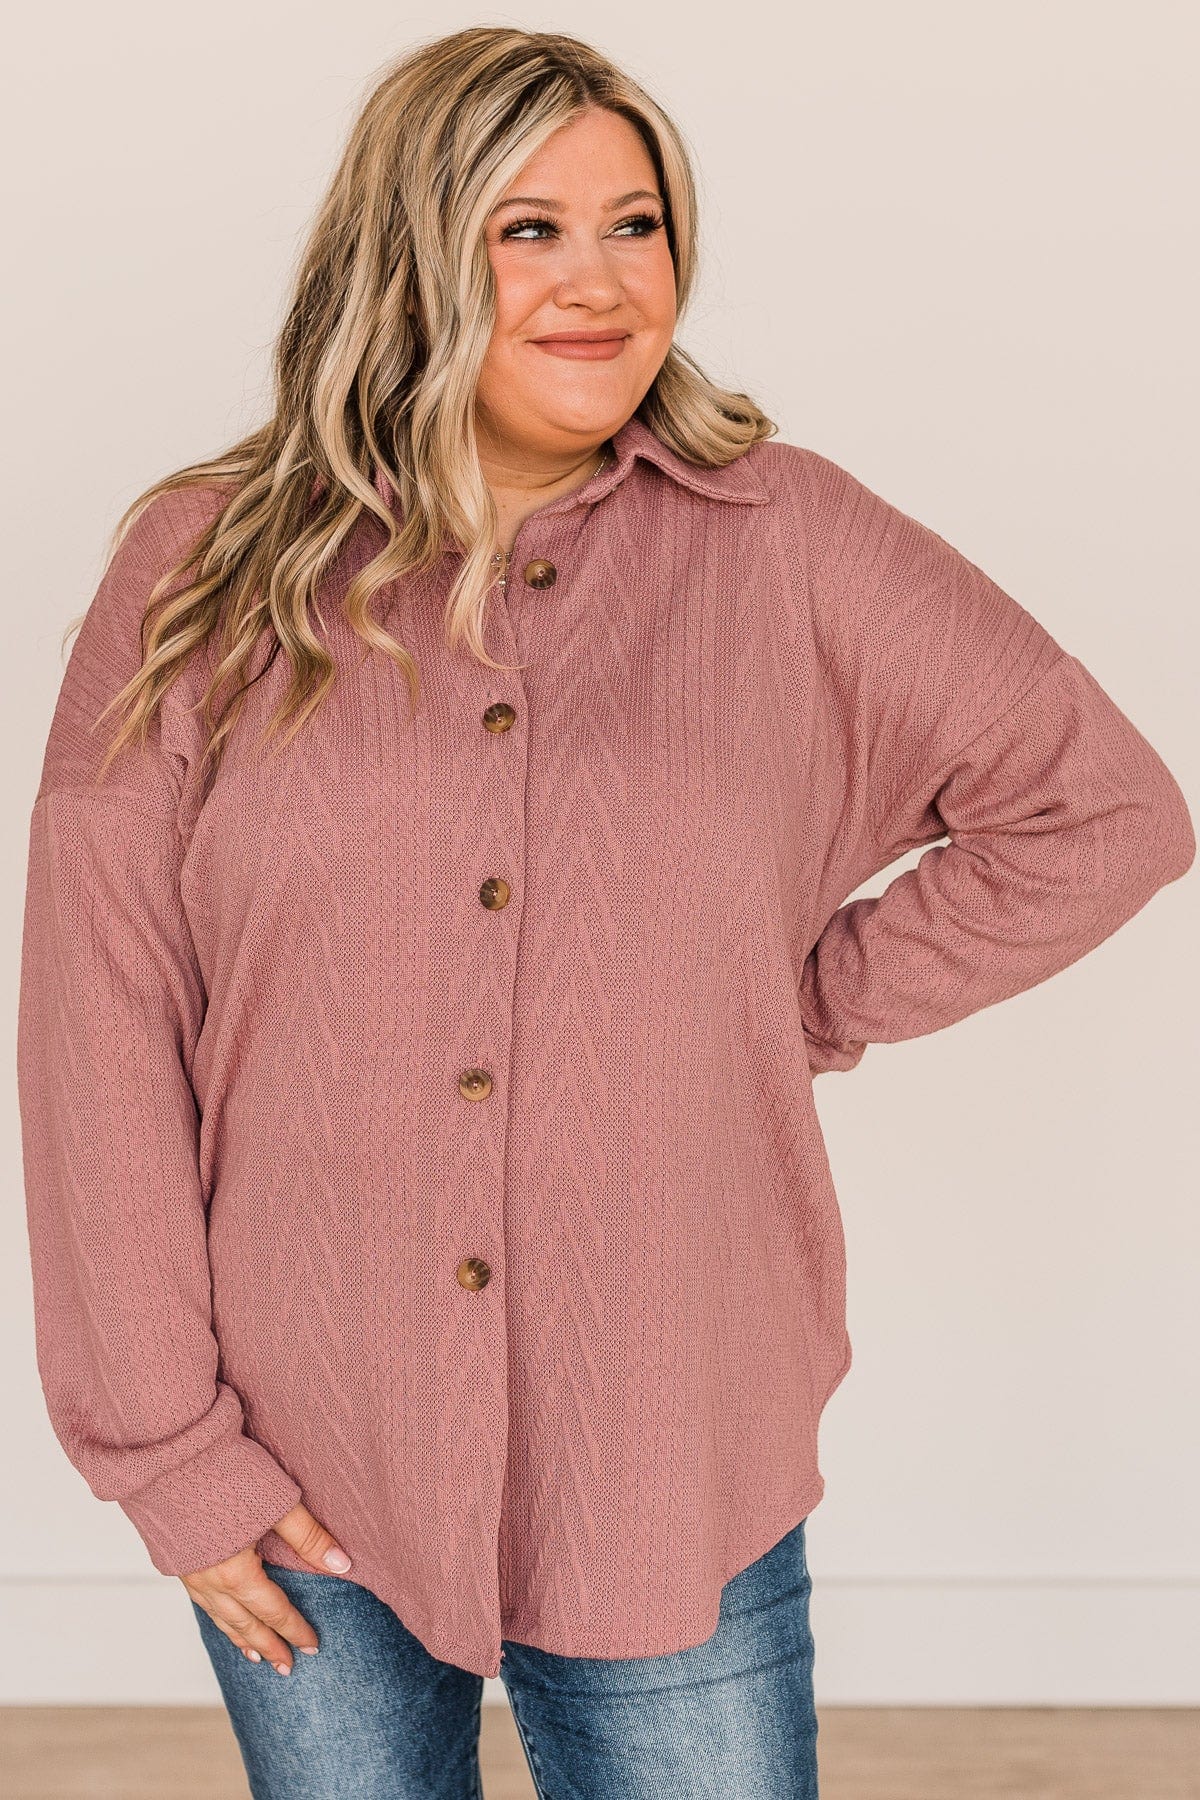 Simply Radiant Cable Knit Button Top- Mauve Pink